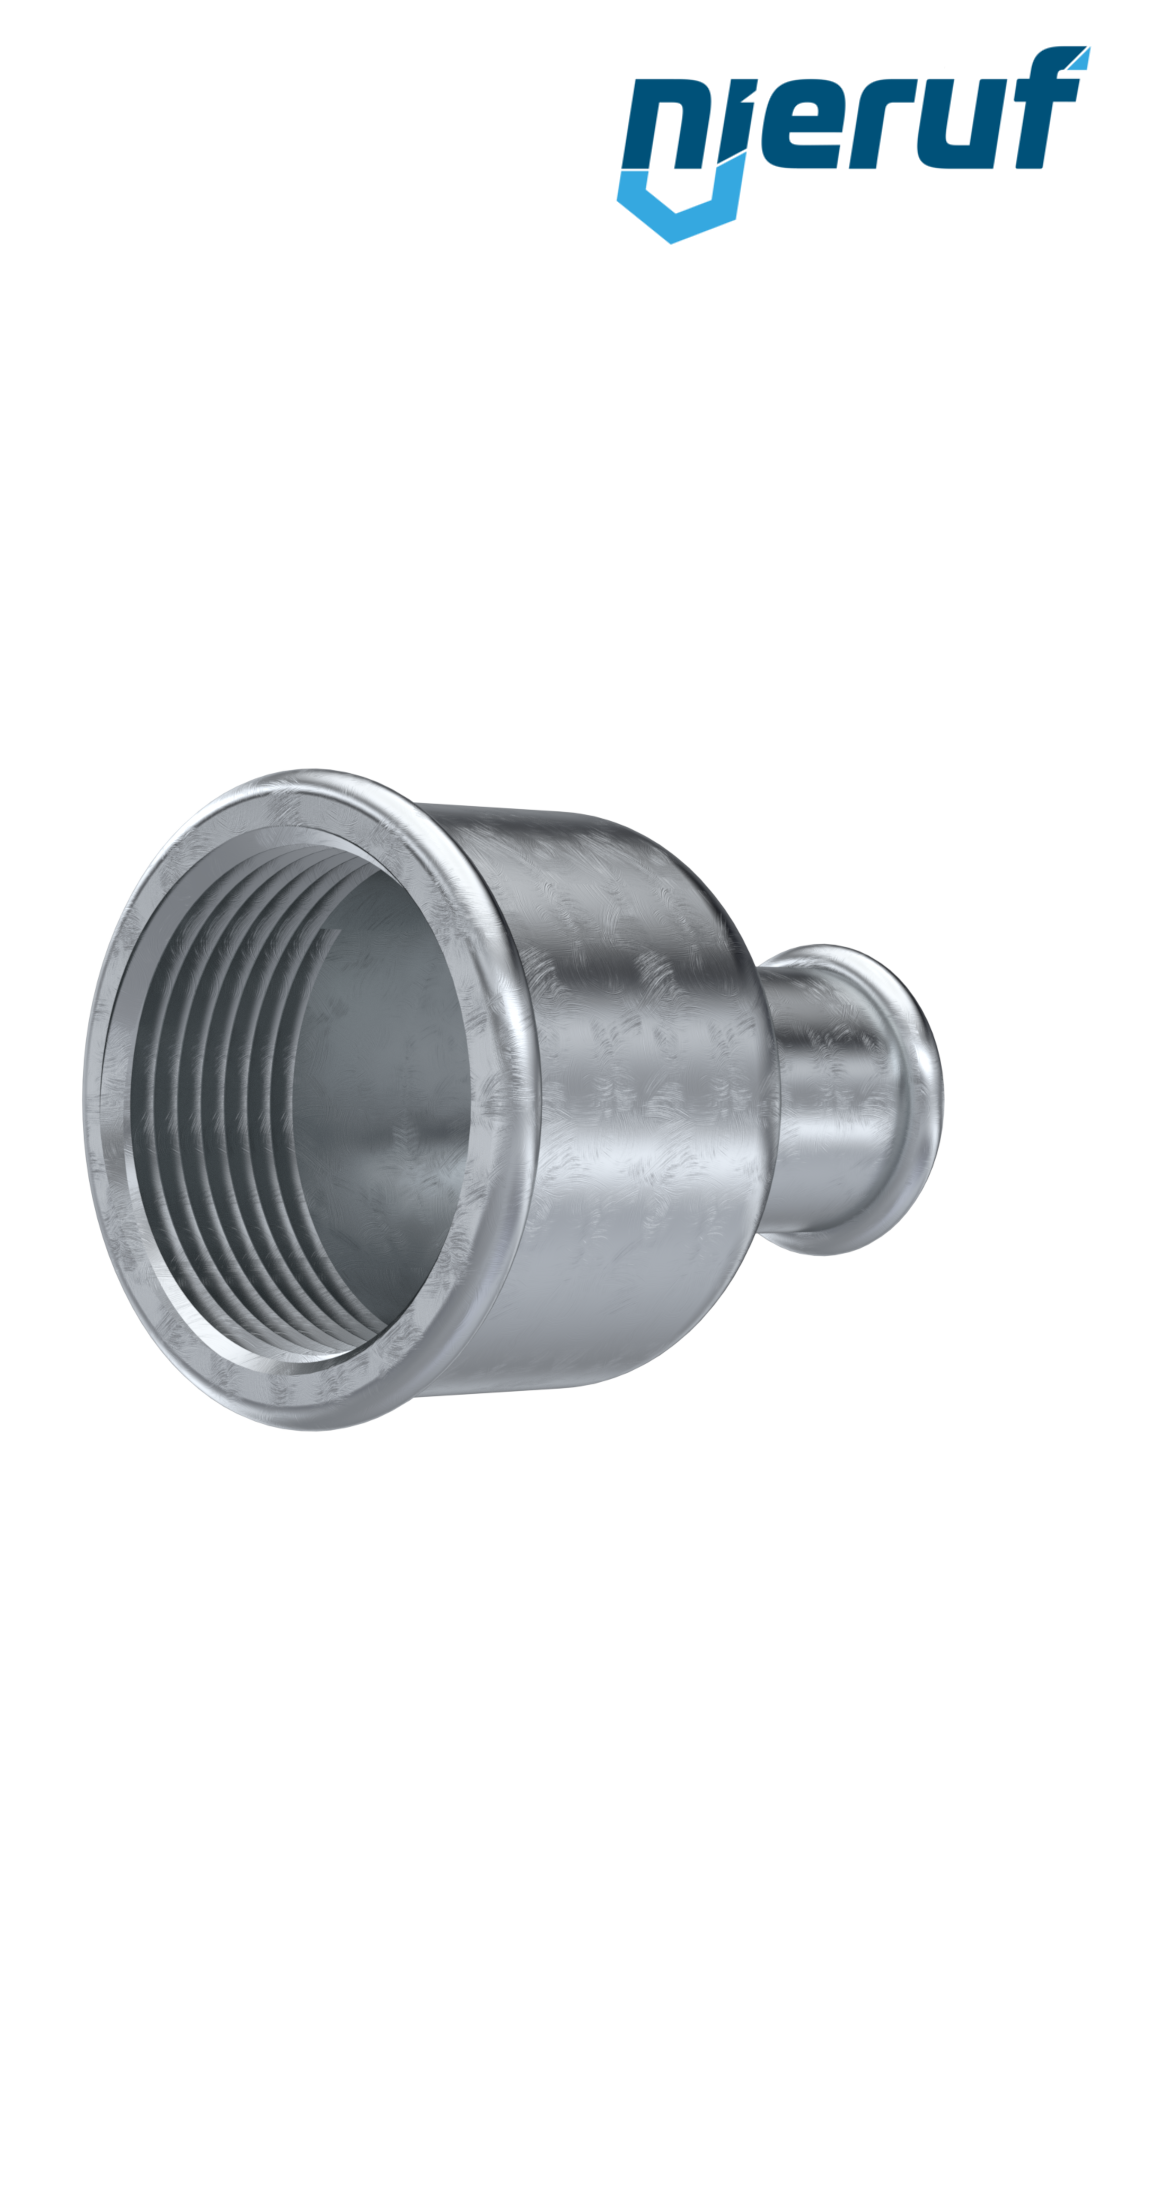 Malleable cast iron fitting reducing socket no. 240, 2" x 1 1/2" inch galvanized